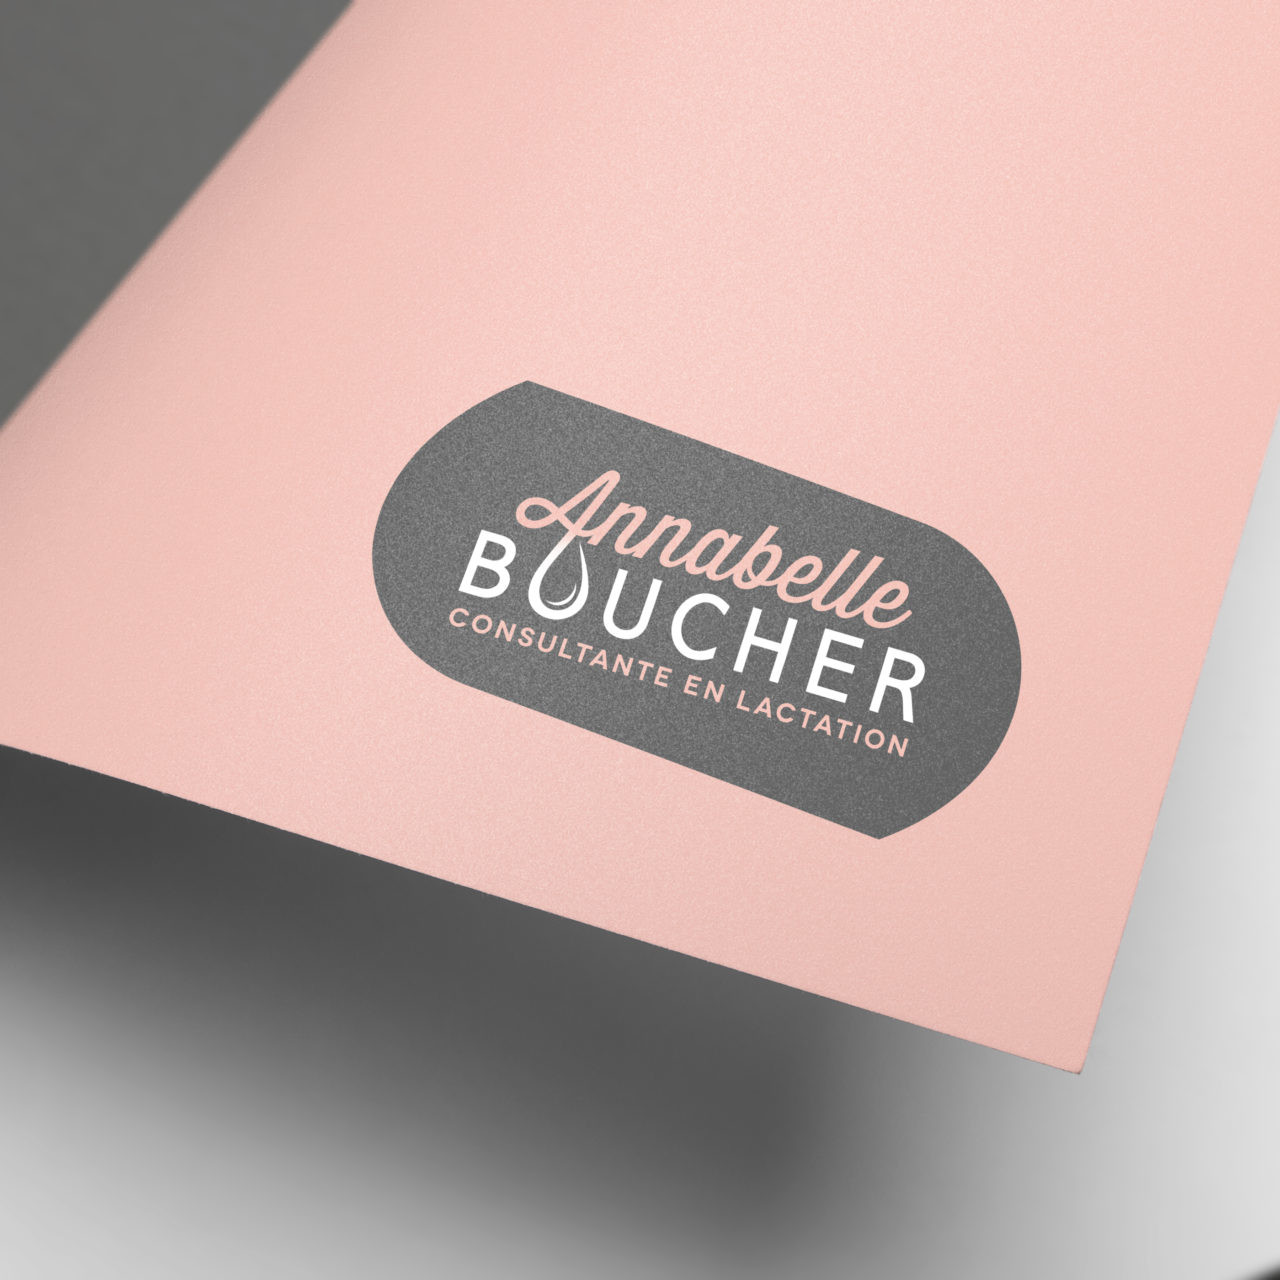 Rolled up white paper with pink back and Annabelle Boucher logo